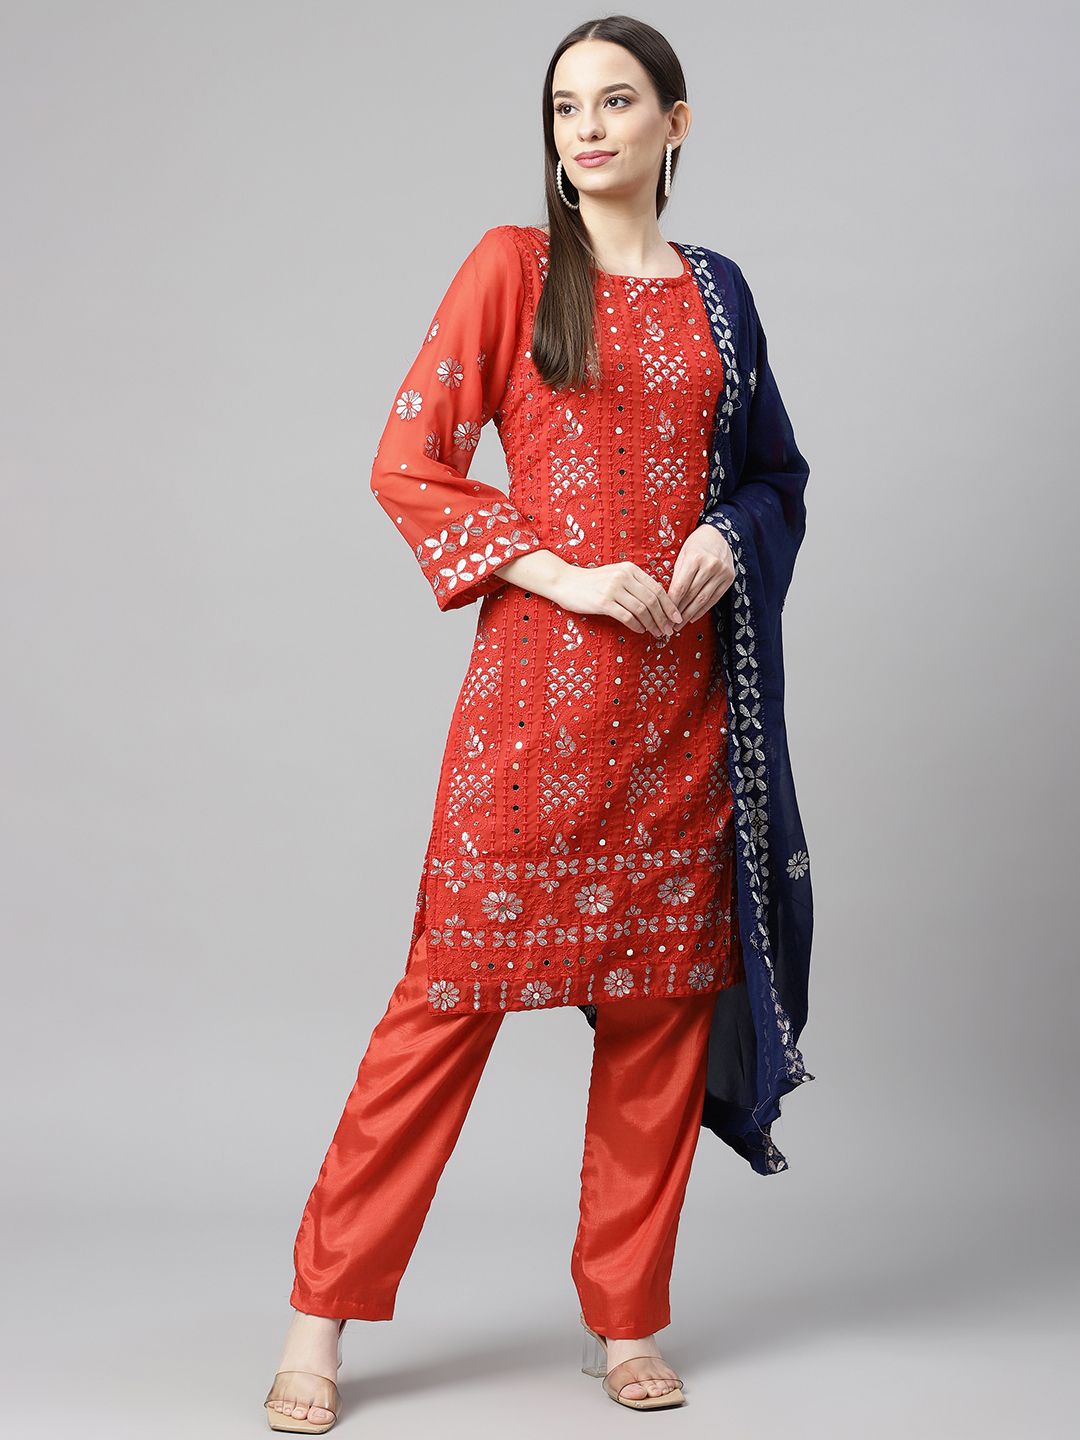 Readiprint Fashions Red & Blue Embroidered Unstitched Dress Material Price in India